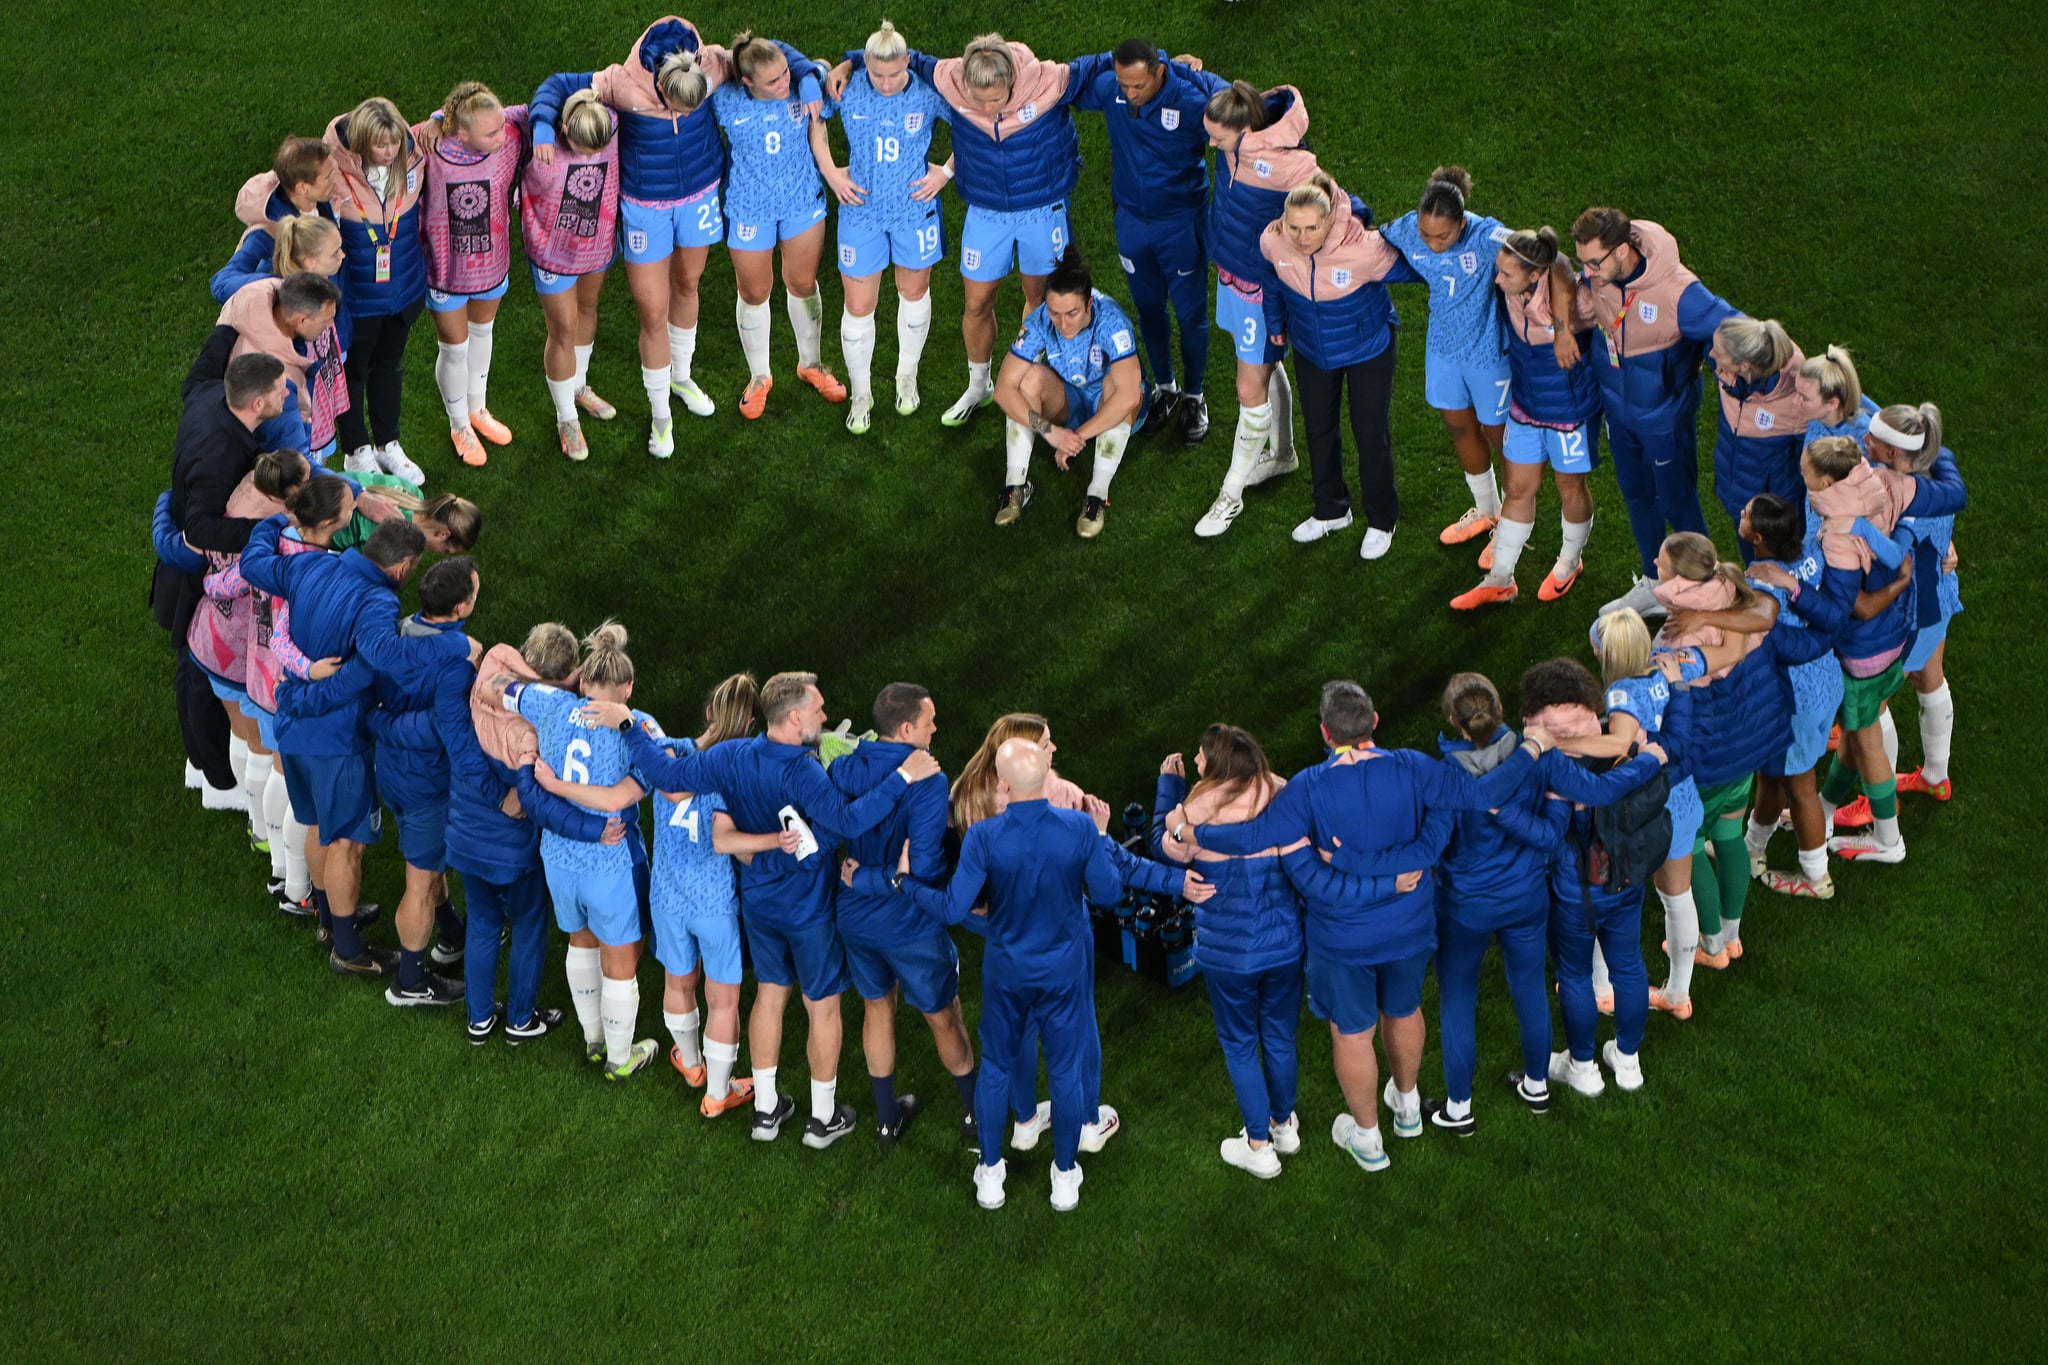 SYDNEY, AUSTRALIA - AUGUST 20: England players huddle after the team's defeat following during the FIFA Women's World Cup Australia & New Zealand 2023 Final match between Spain and England at Stadium Australia on August 20, 2023 in Sydney, Australia. (Photo by Quinn Rooney/Getty Images)